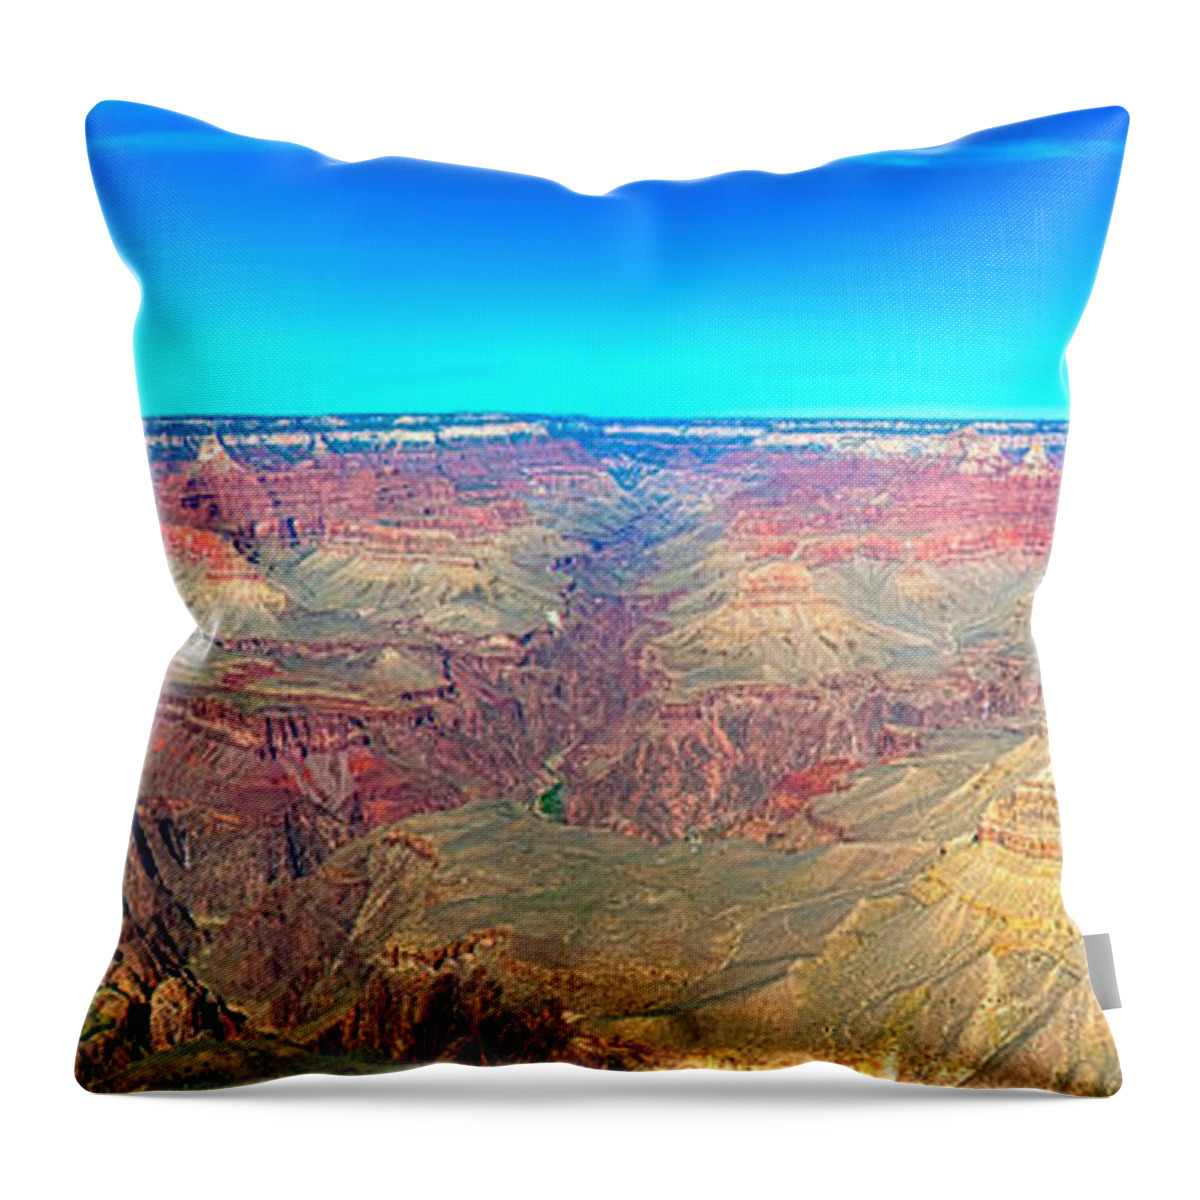 If You Look Closely You Can See The Colorado River ...sort Of. The Grand Canyon Is Definitely Breathtaking And I Hope You Agree That I Captured A Little Of It's Beauty. Throw Pillow featuring the photograph Grand Canyon Panorama by Penny Lisowski